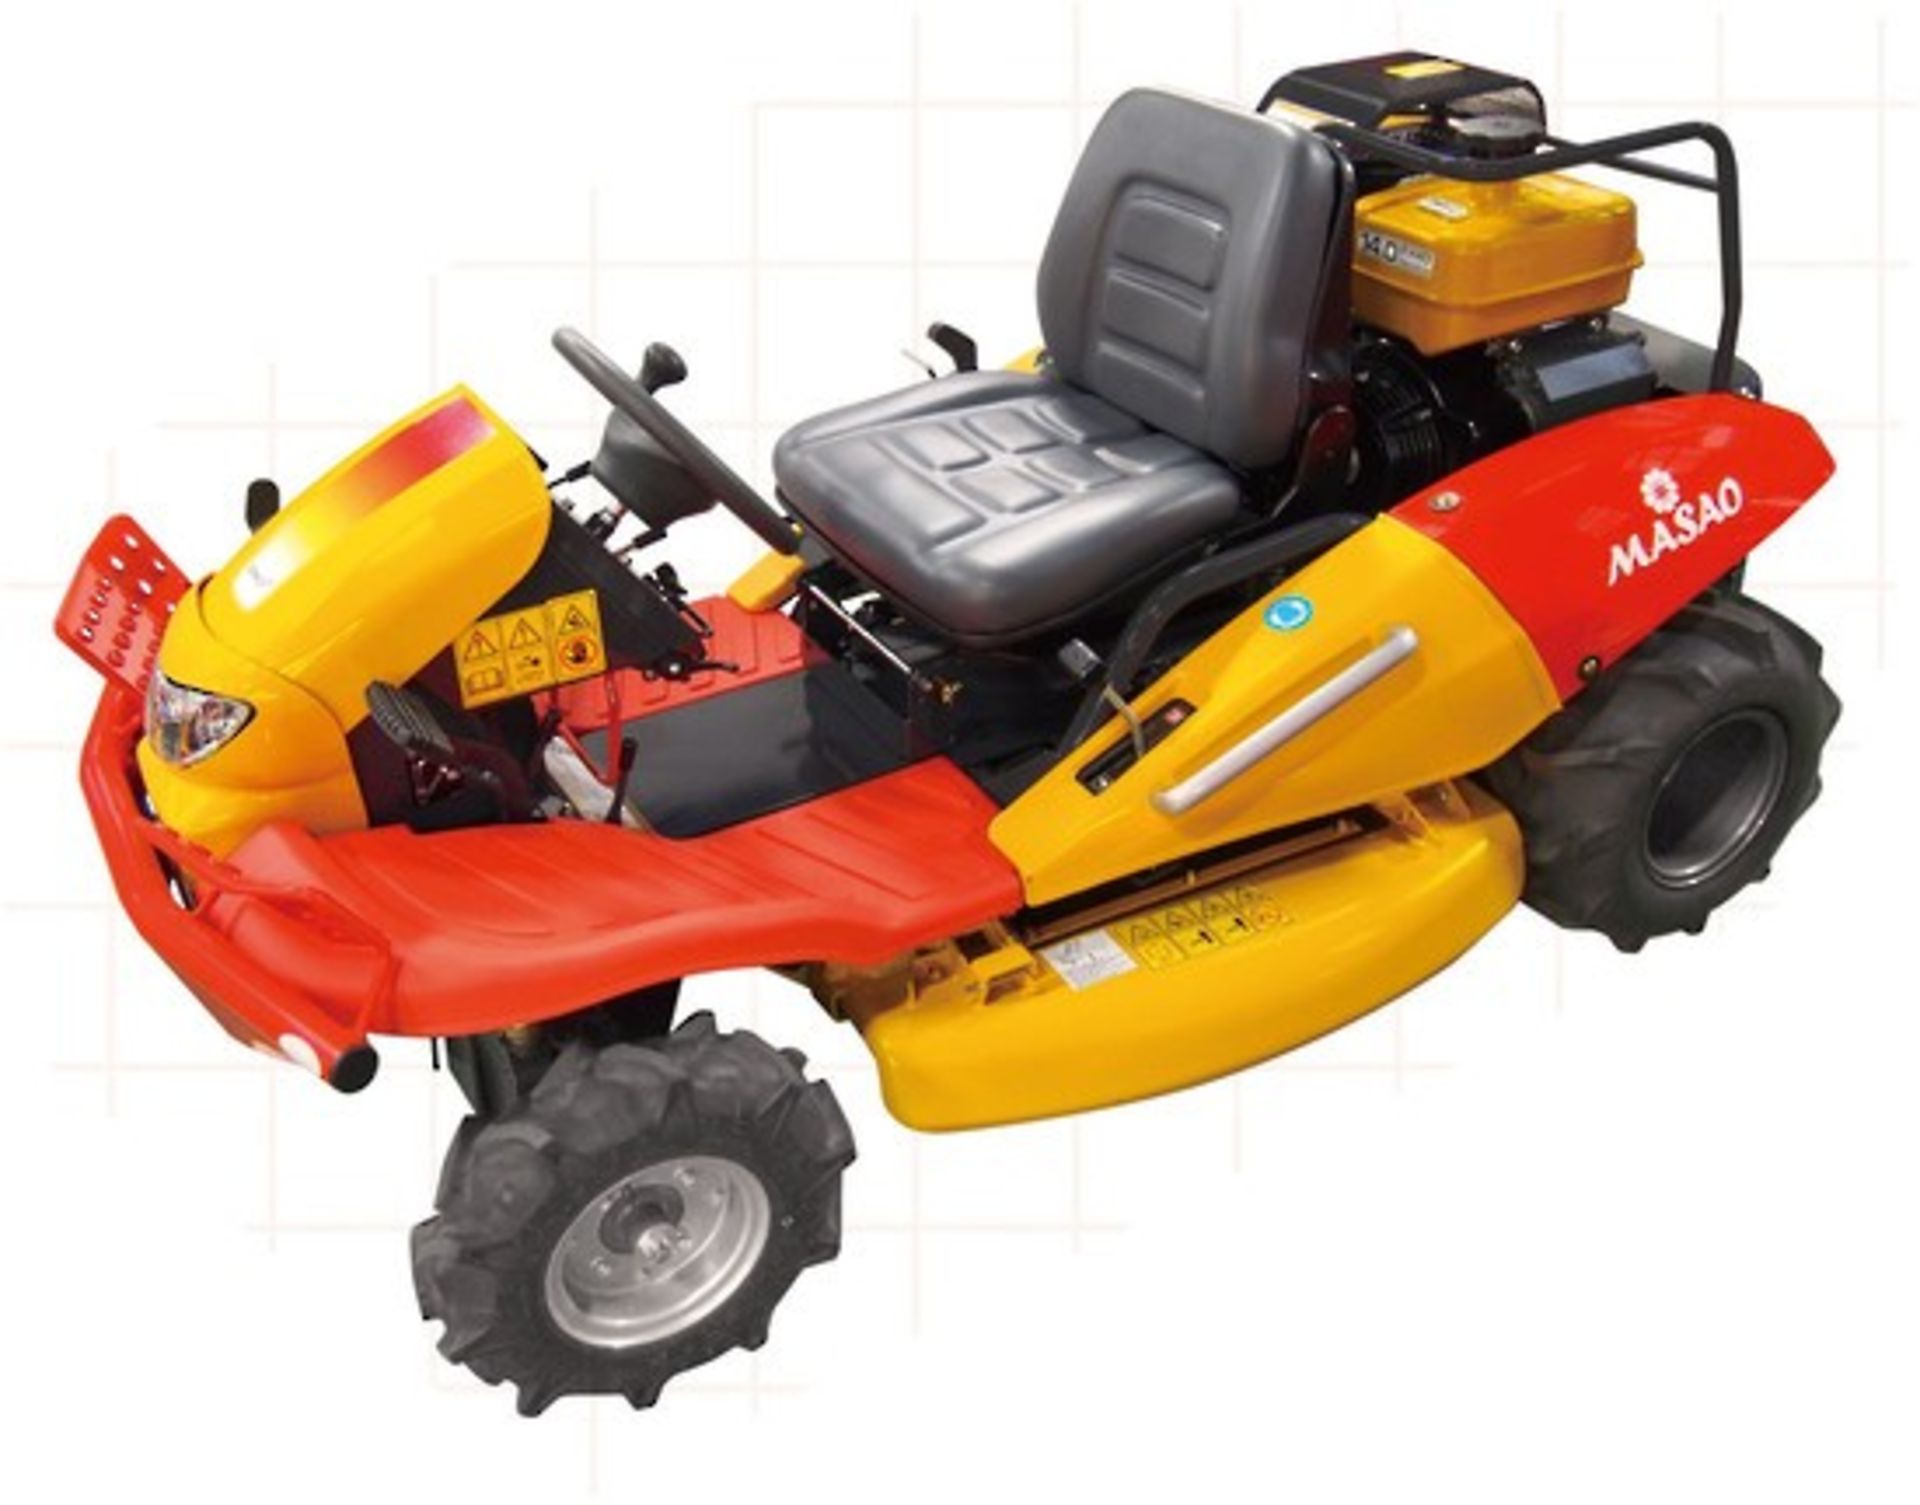 Canycom CM1401 2 WD Mower ALL TERRAIN RIDE ON